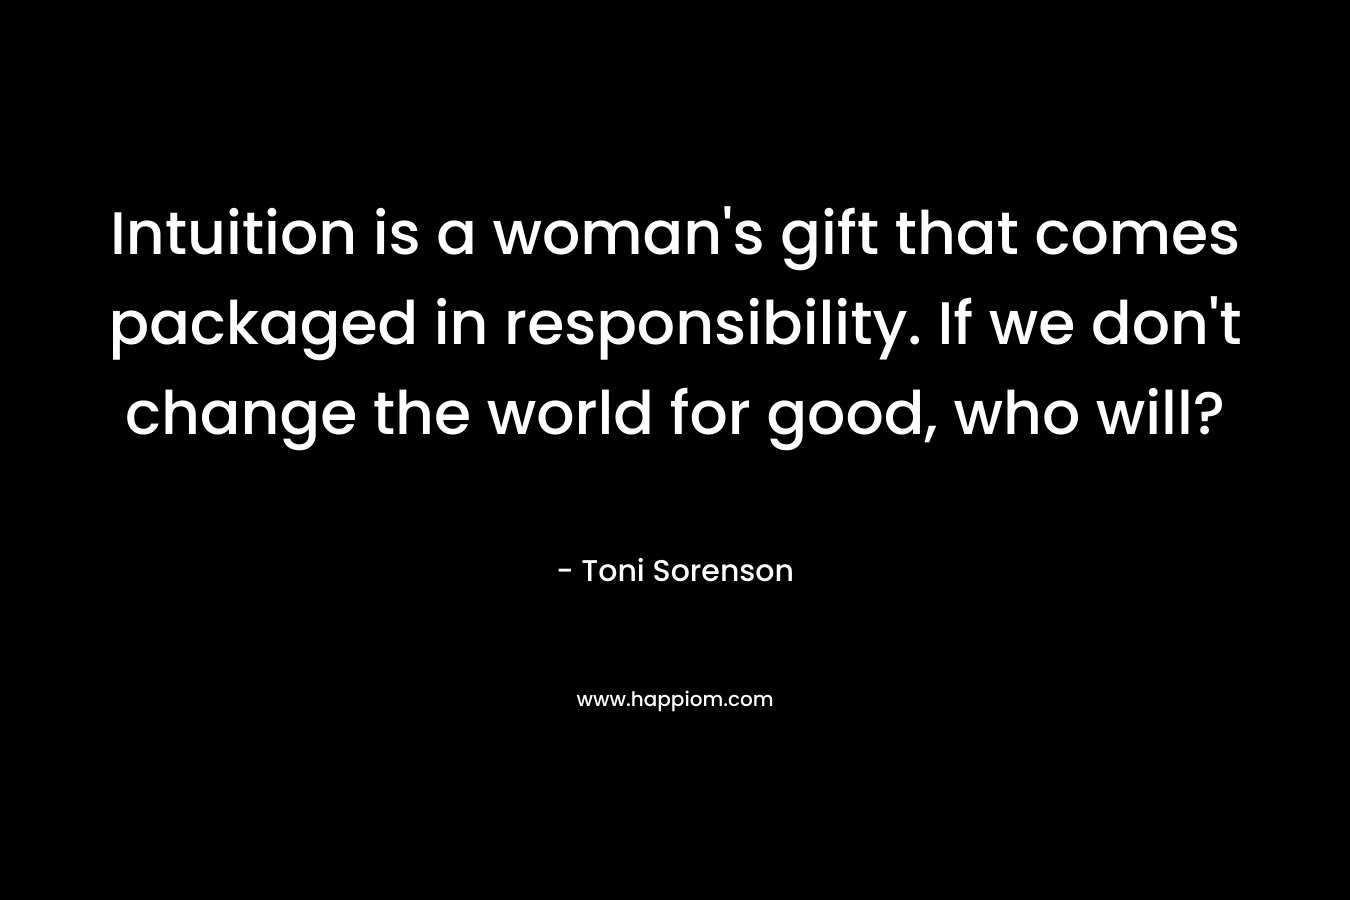 Intuition is a woman's gift that comes packaged in responsibility. If we don't change the world for good, who will?